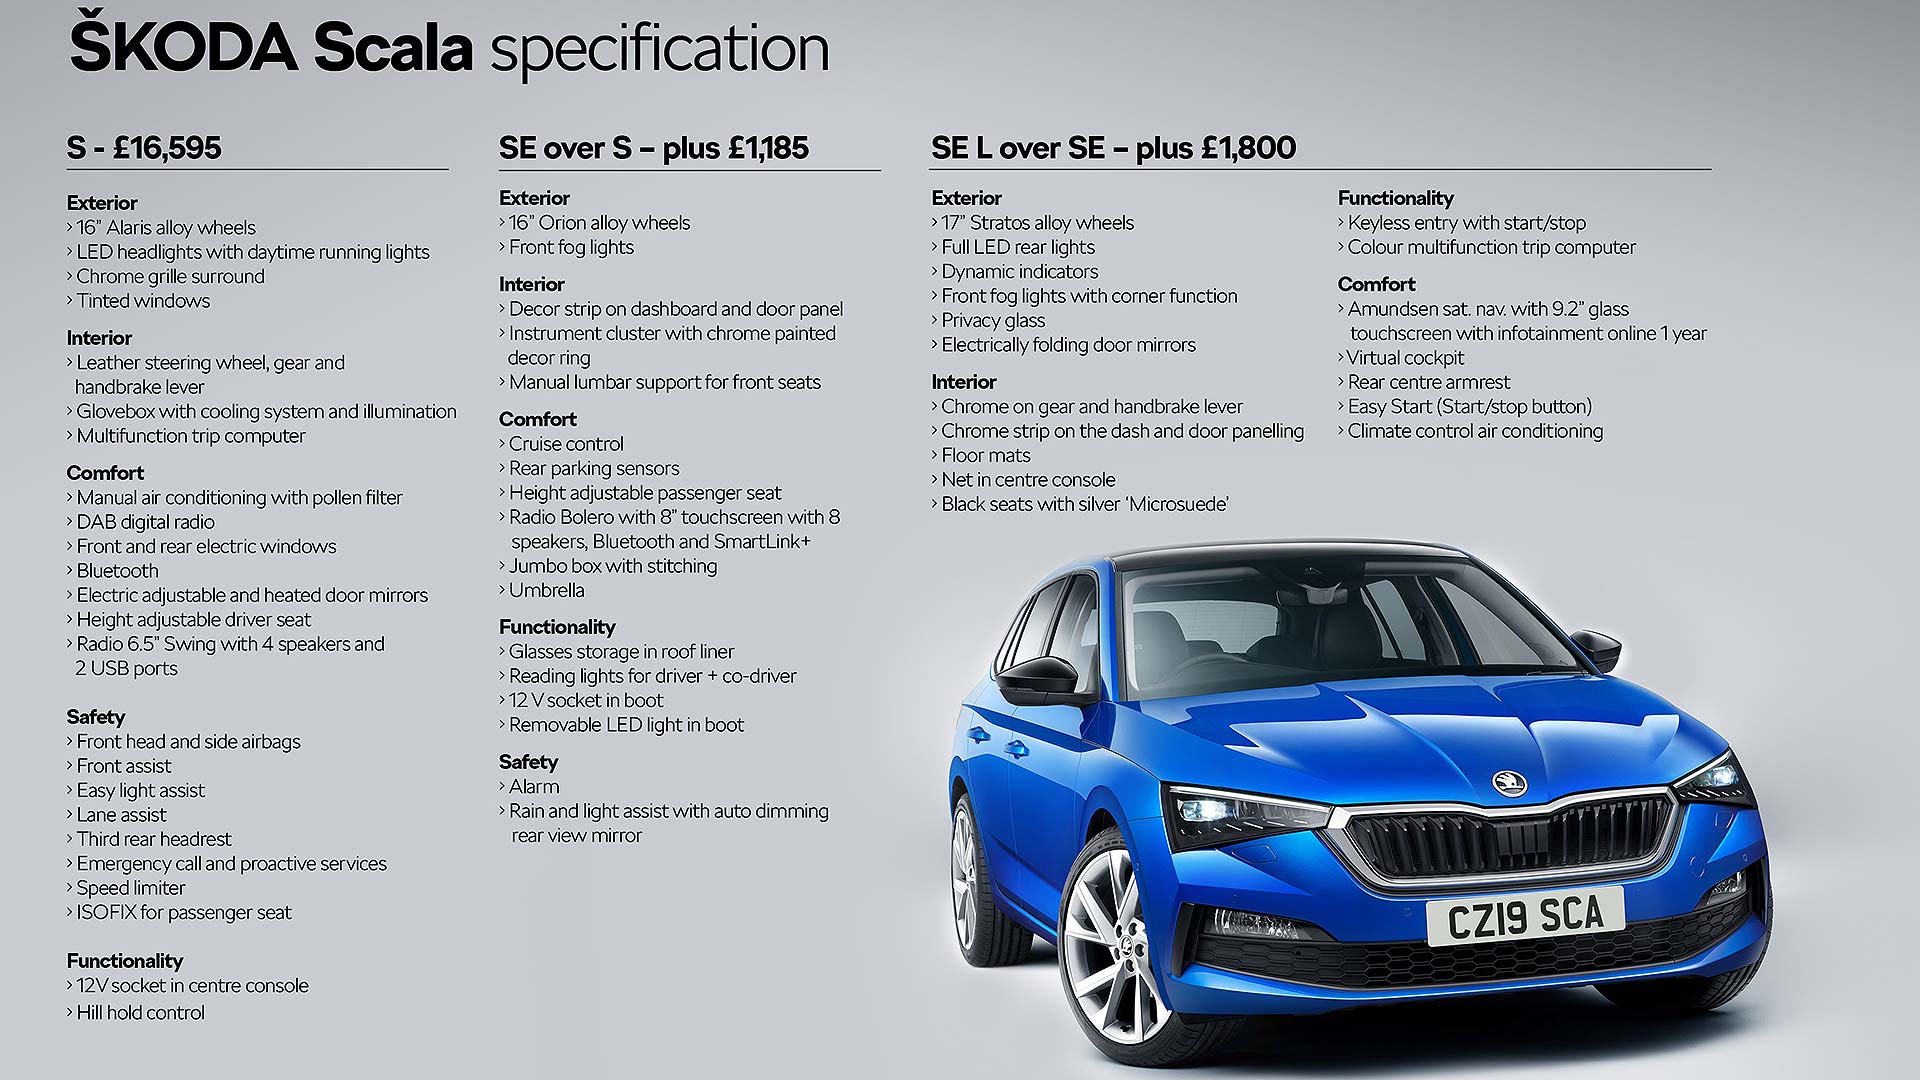 Skoda Scala Prices and specs of new Ford Focus fighter revealed